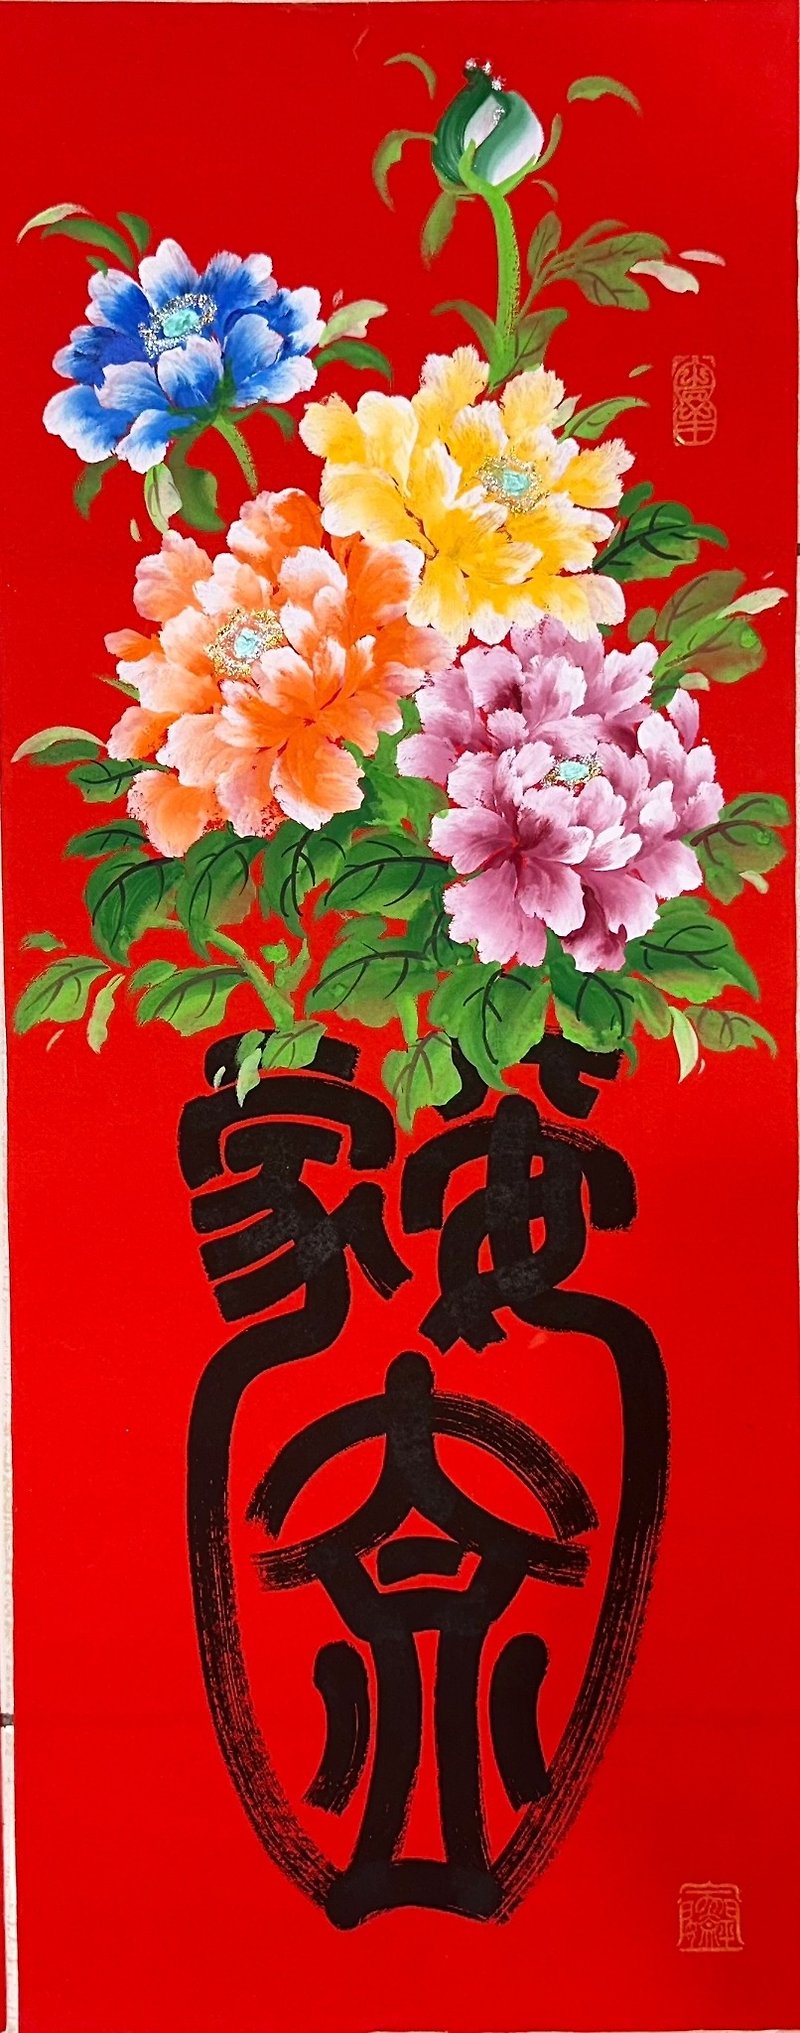 Five elements bring good luck, flowers bloom, wealth and family peace New Year pictures - Chinese New Year - Paper Red